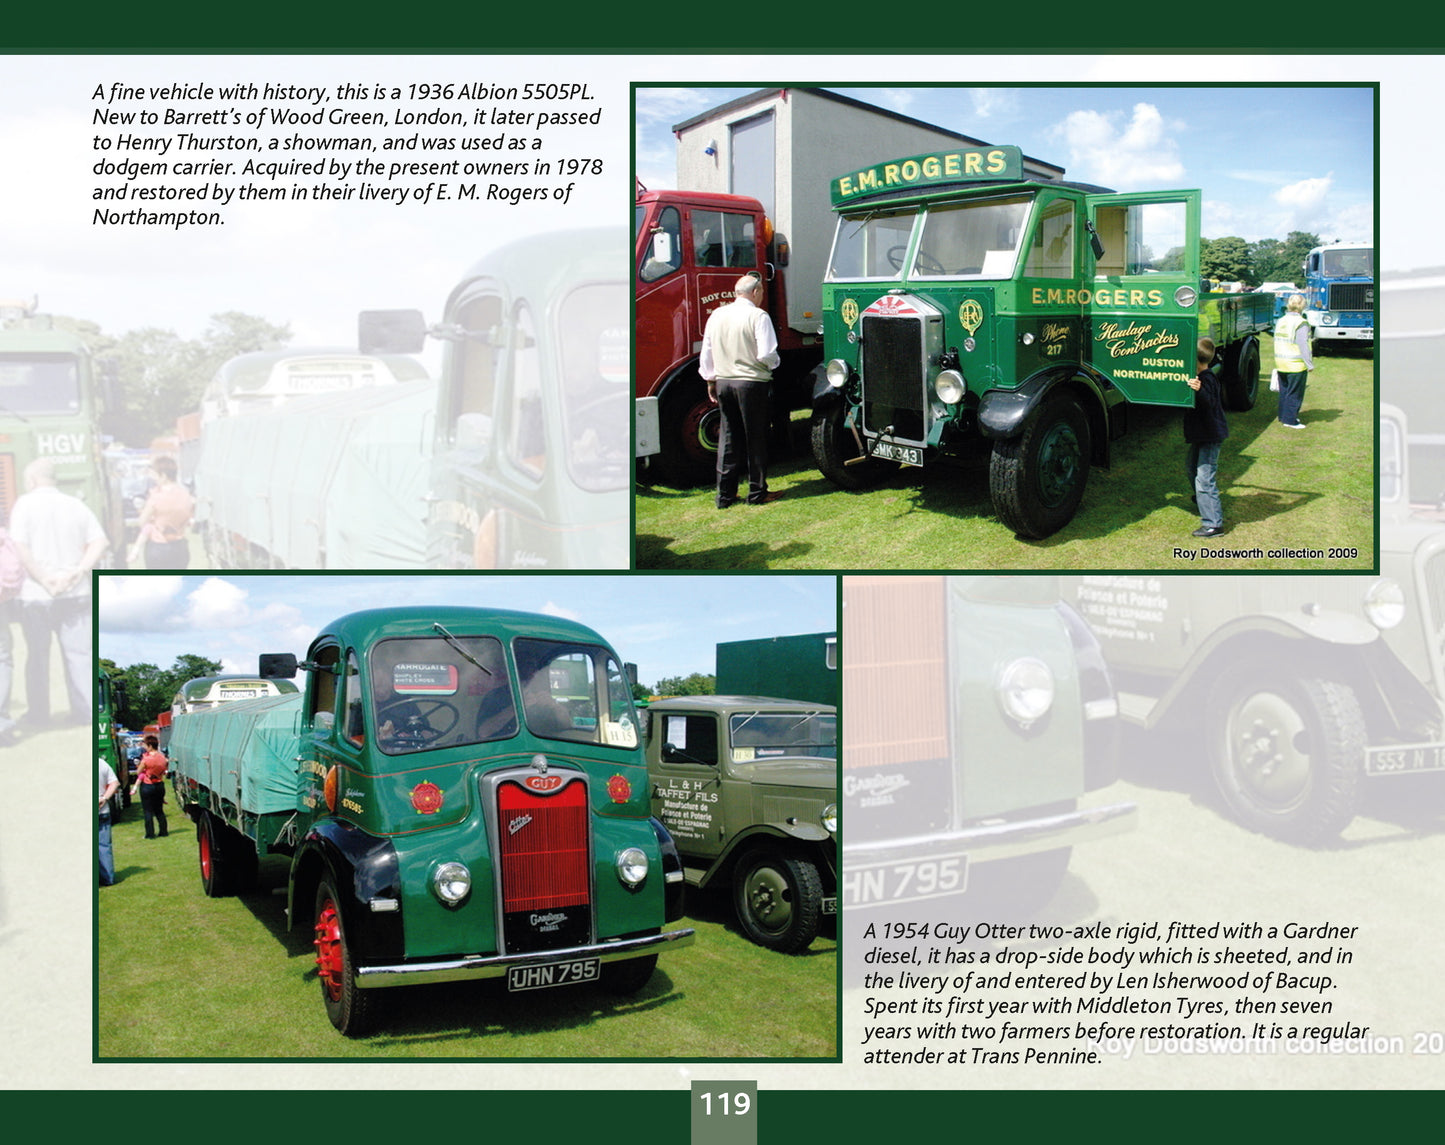 The Trucks of the Trans Pennine Run: A Photographic History